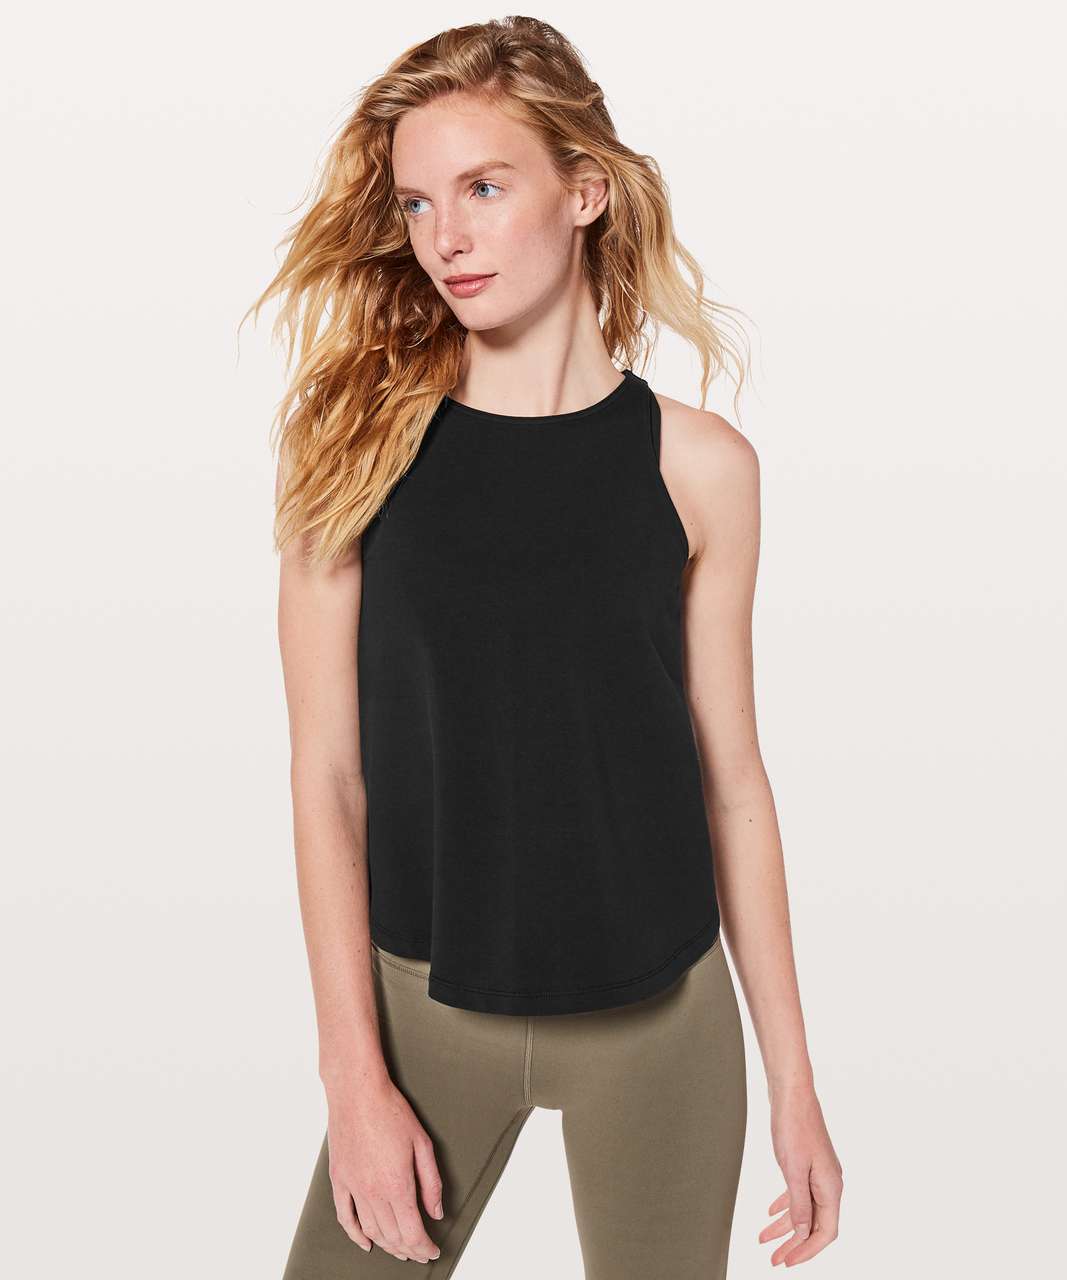 Lululemon Blissed Out Tank - Black (First Release)